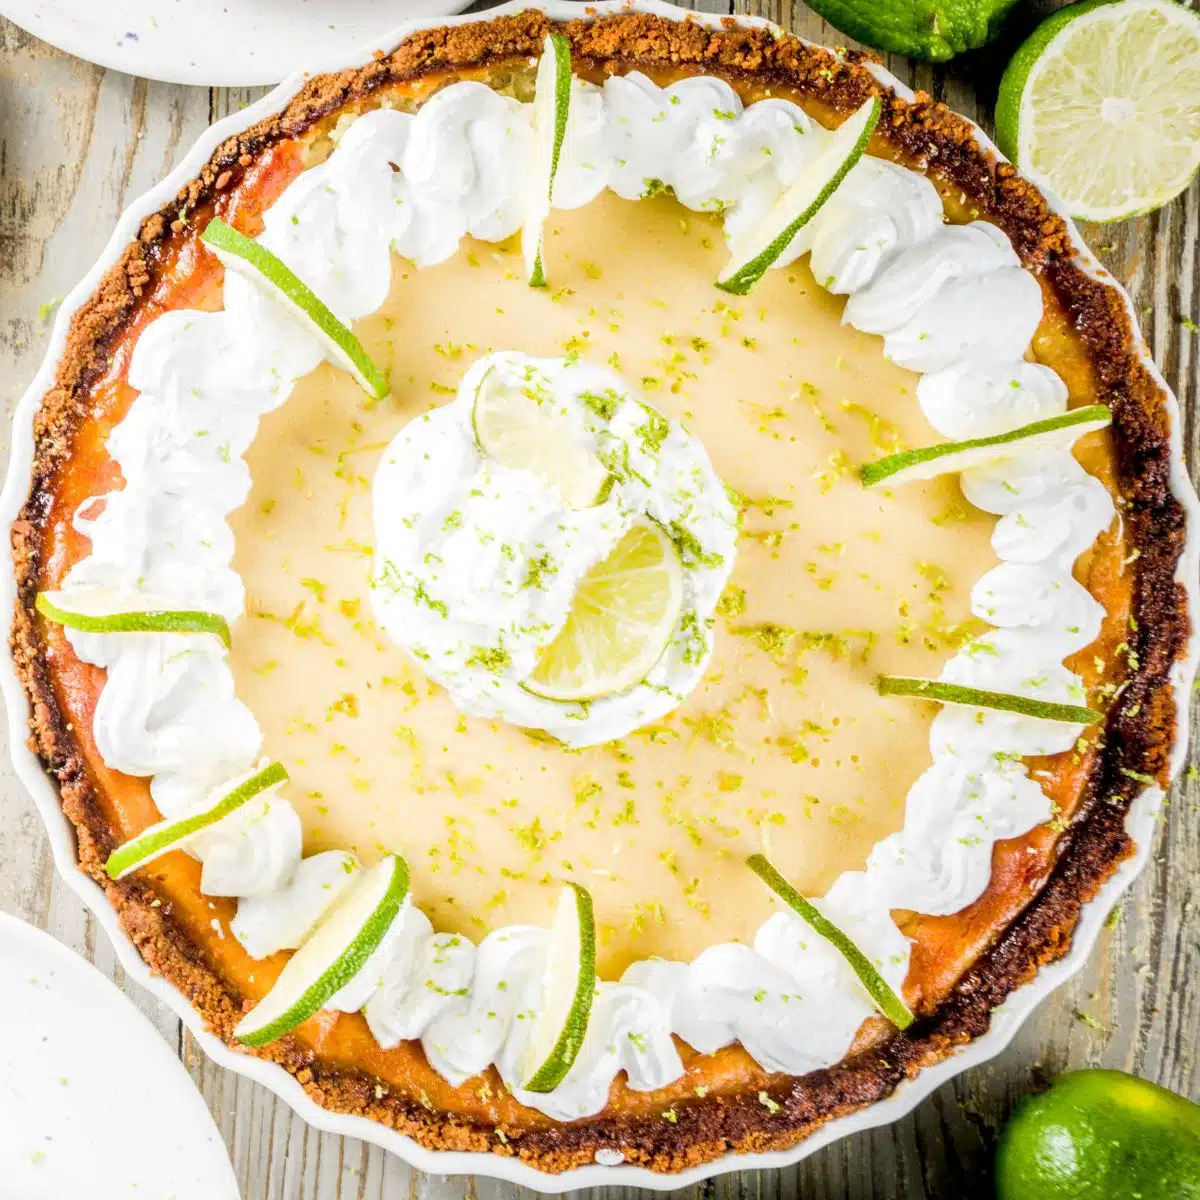 Square image of a whole key lime pie.